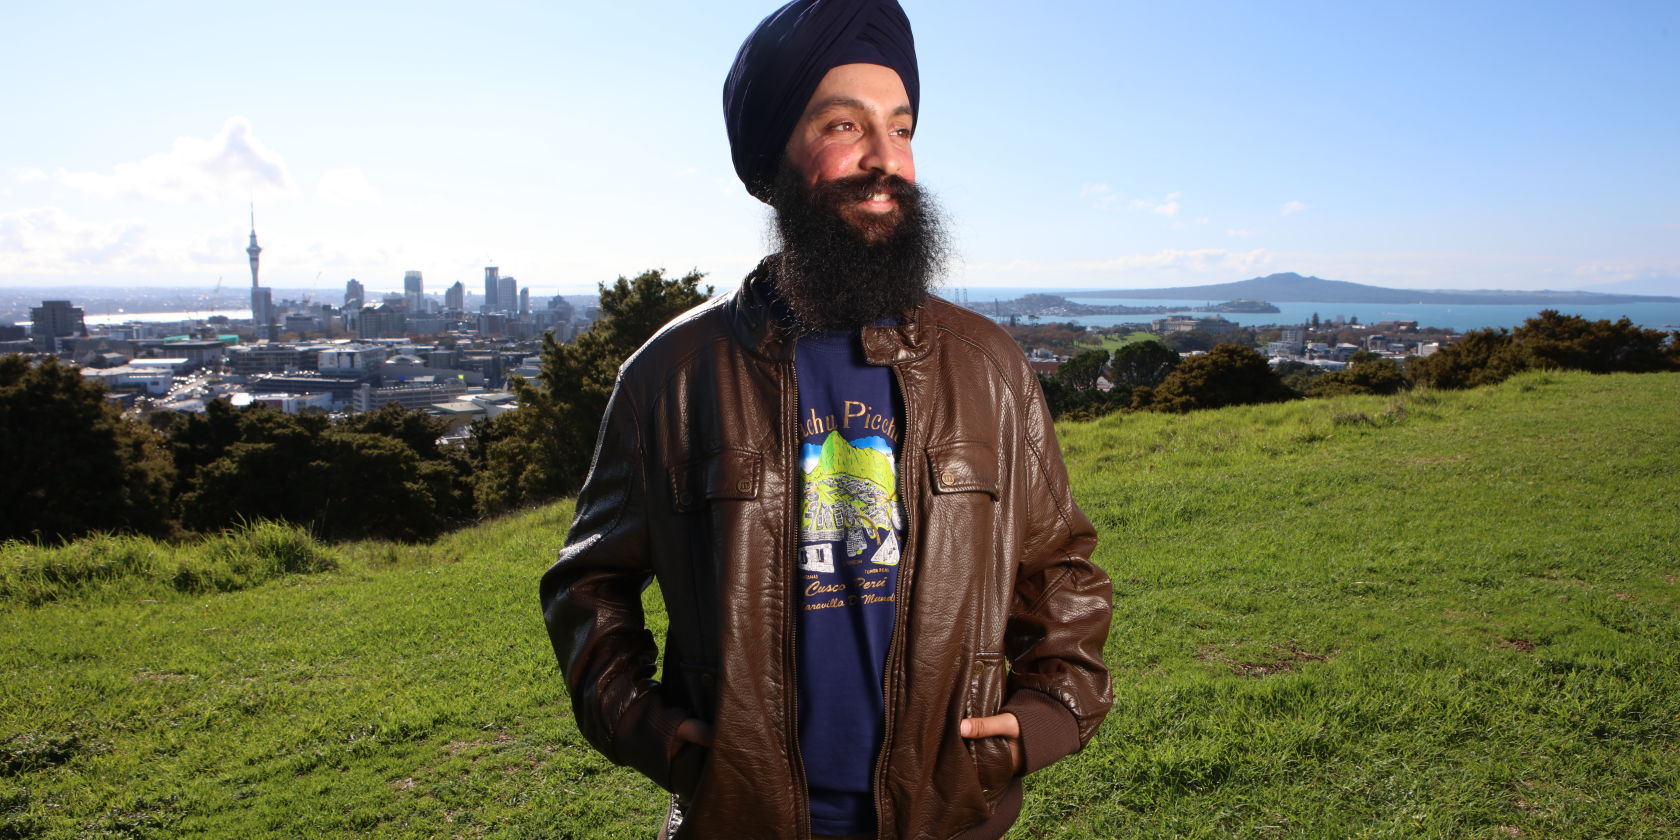 Supporting the community’s most vulnerable is all in a day’s work for Harpreet Singh